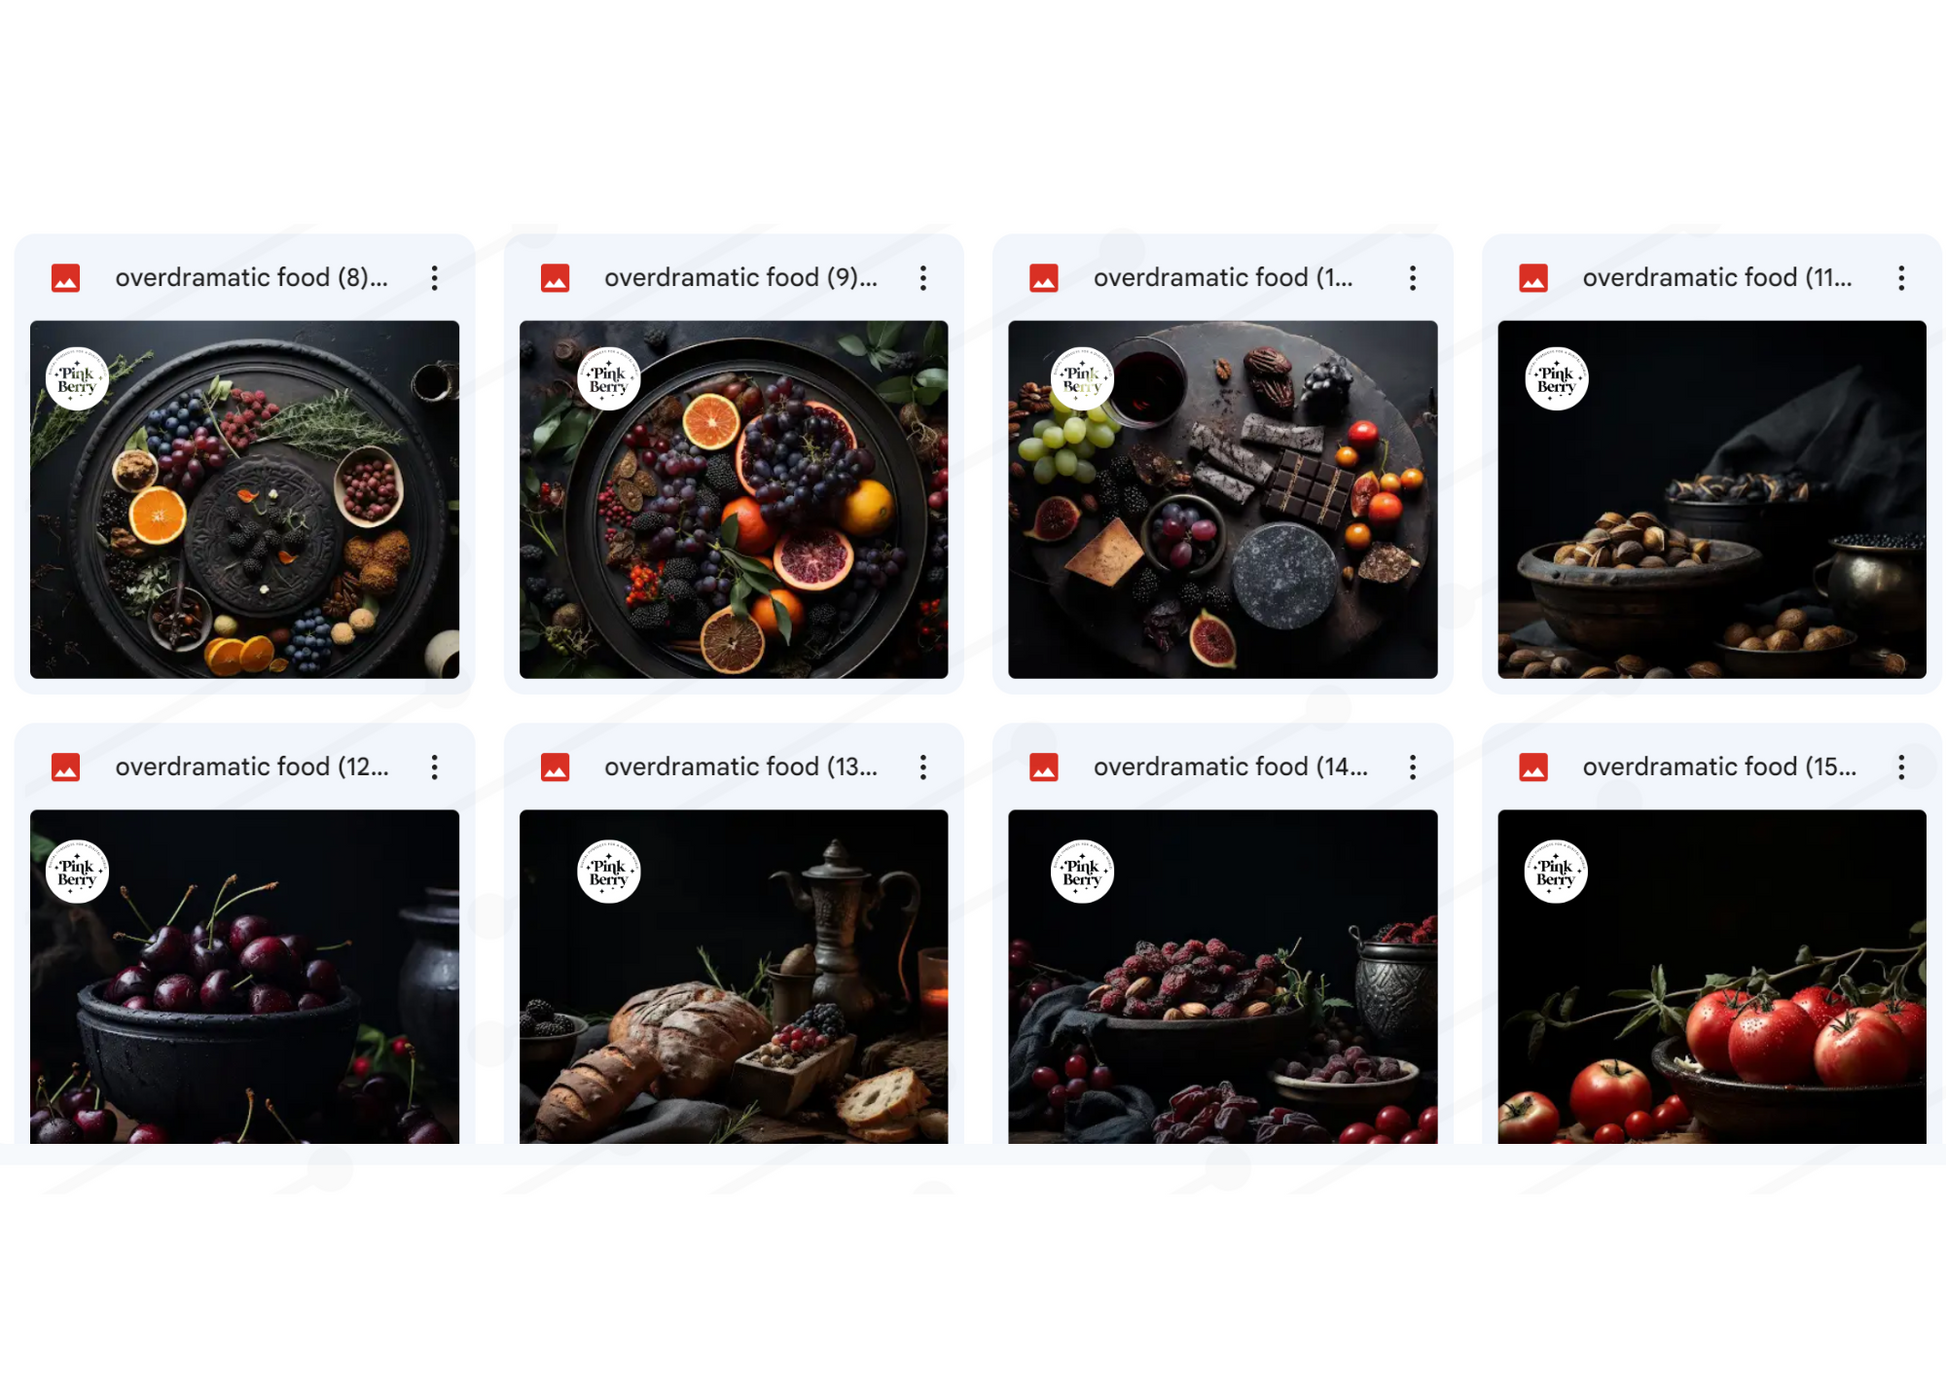 Food Stock Photos Bundle - Old World Food Photos- Specialty Stock Photos -20 Dark Stock Photos PLR (For Your Use Only 